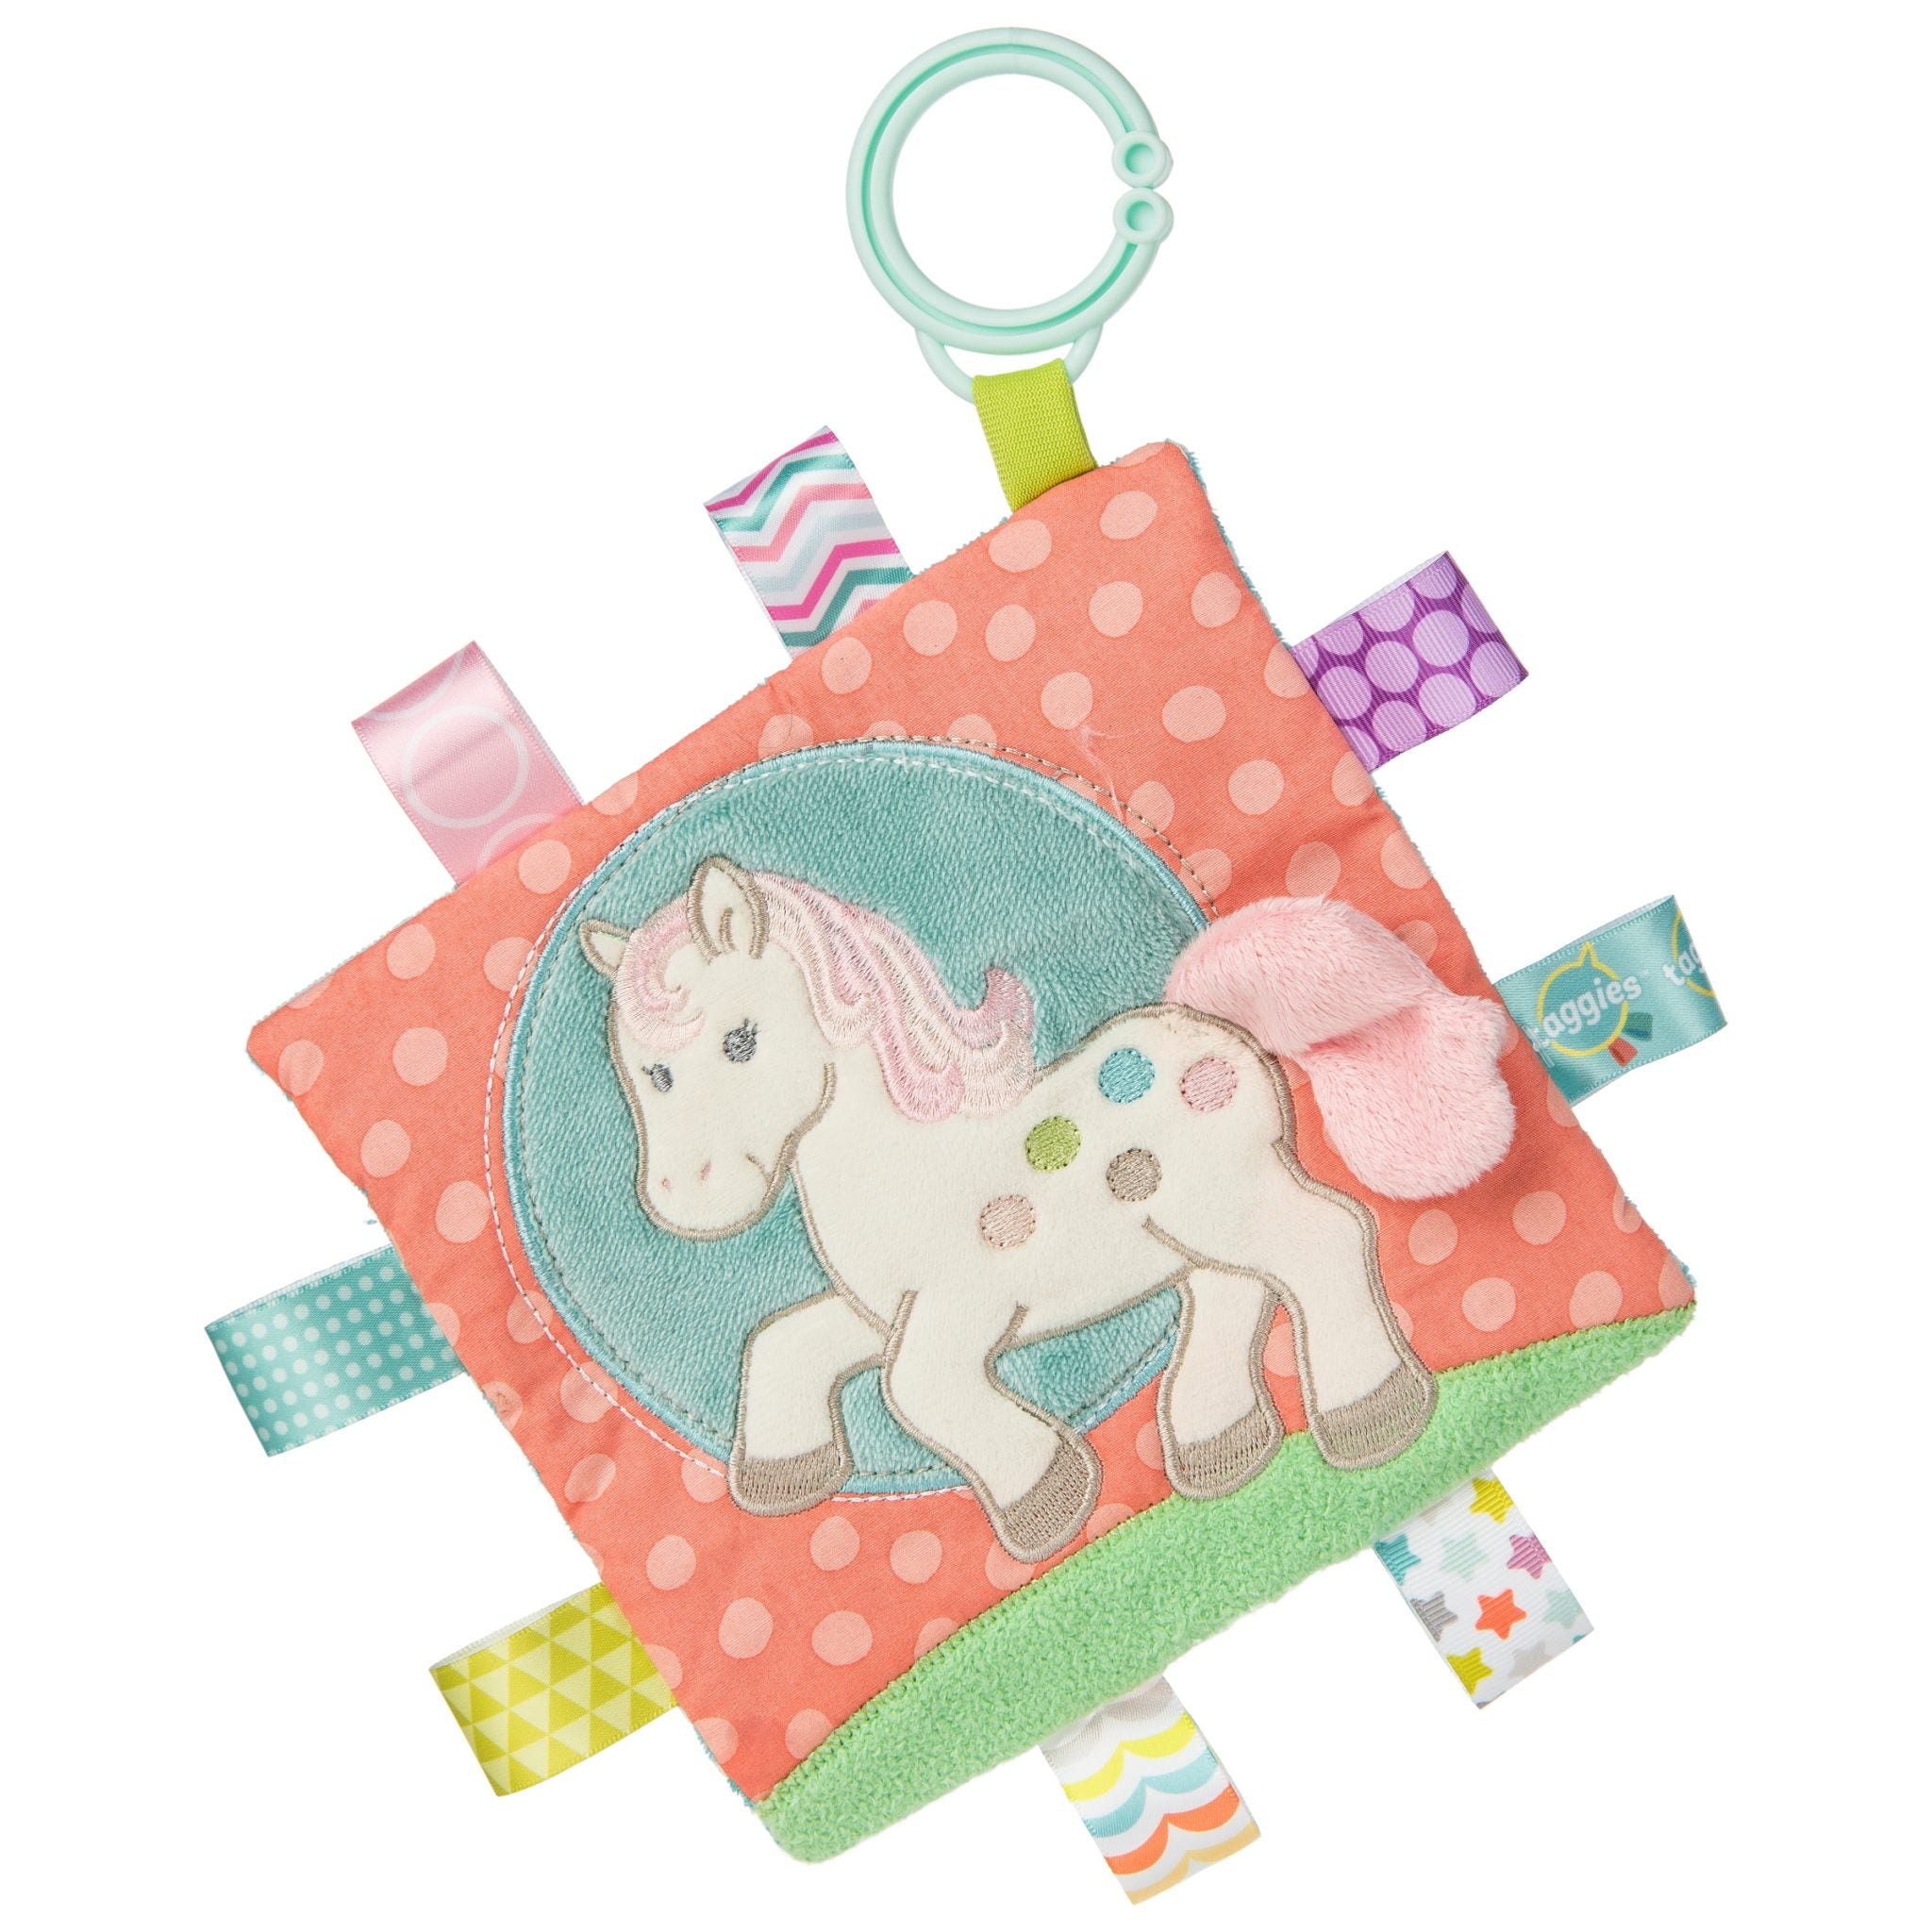 Taggies  Crinkle Me - Painted Pony Soft Toy - 6"  - Ages 0 mths +